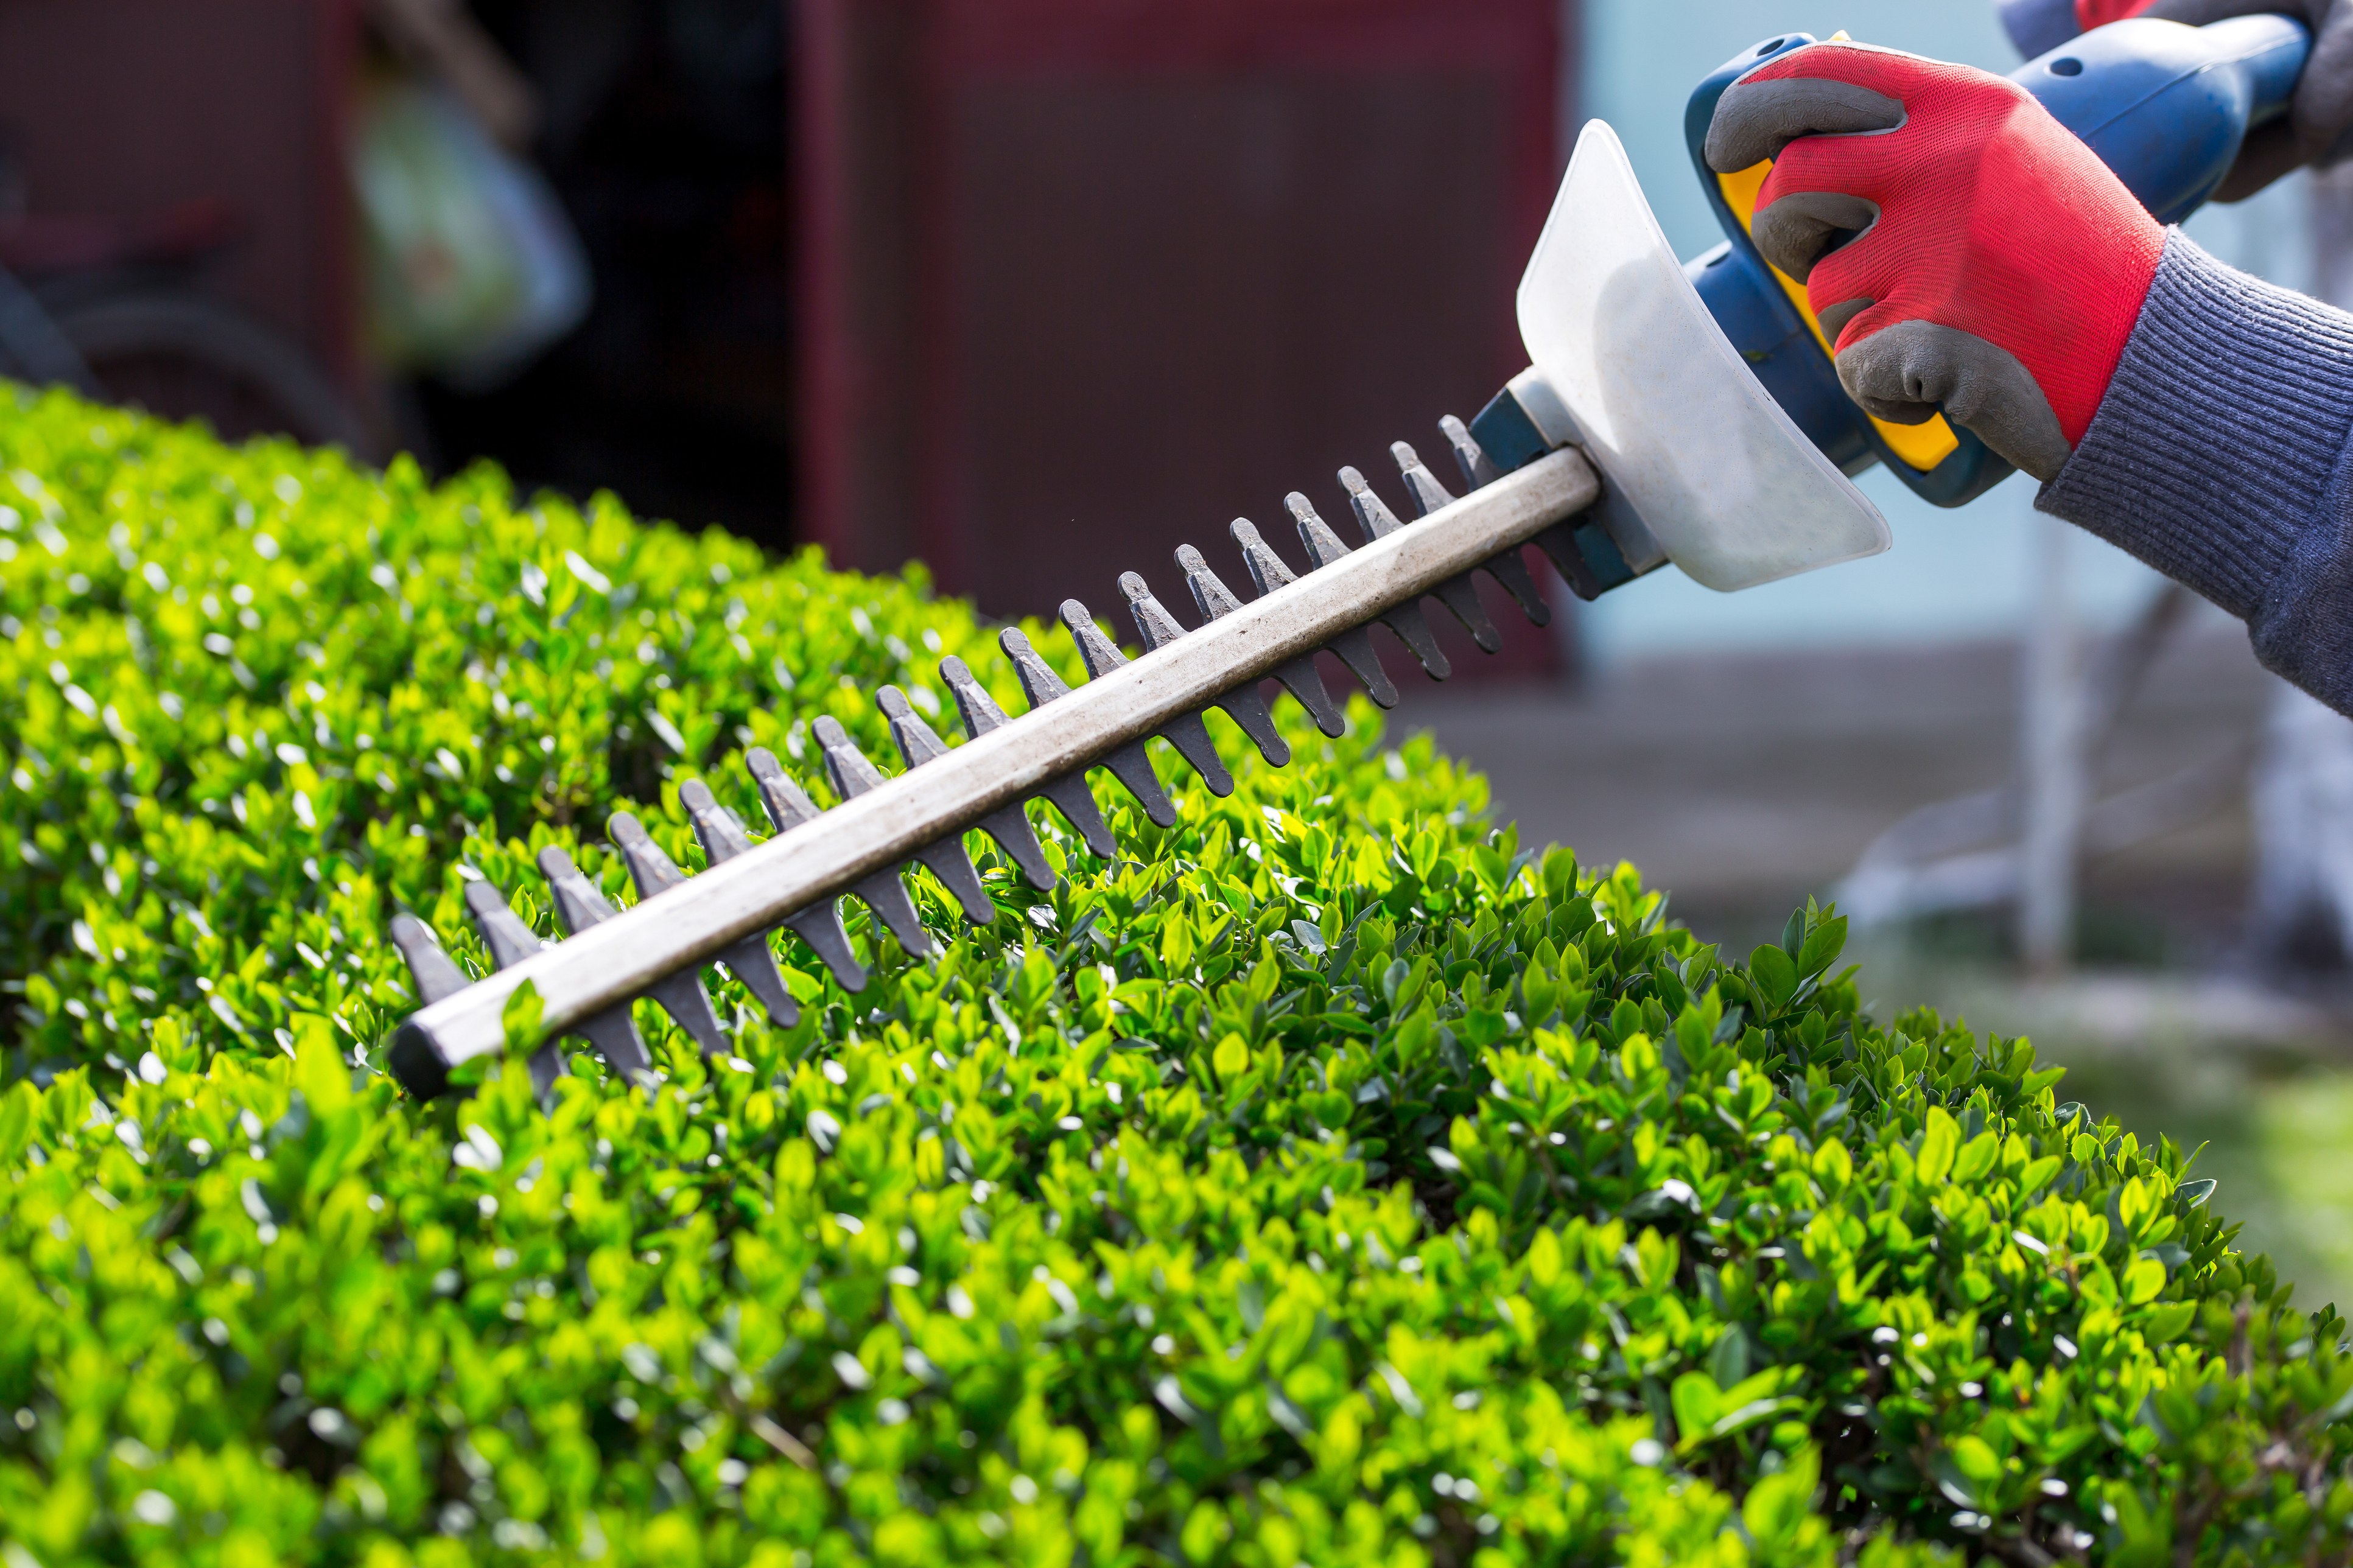 trimming a hedge (Thinkstock/PA)